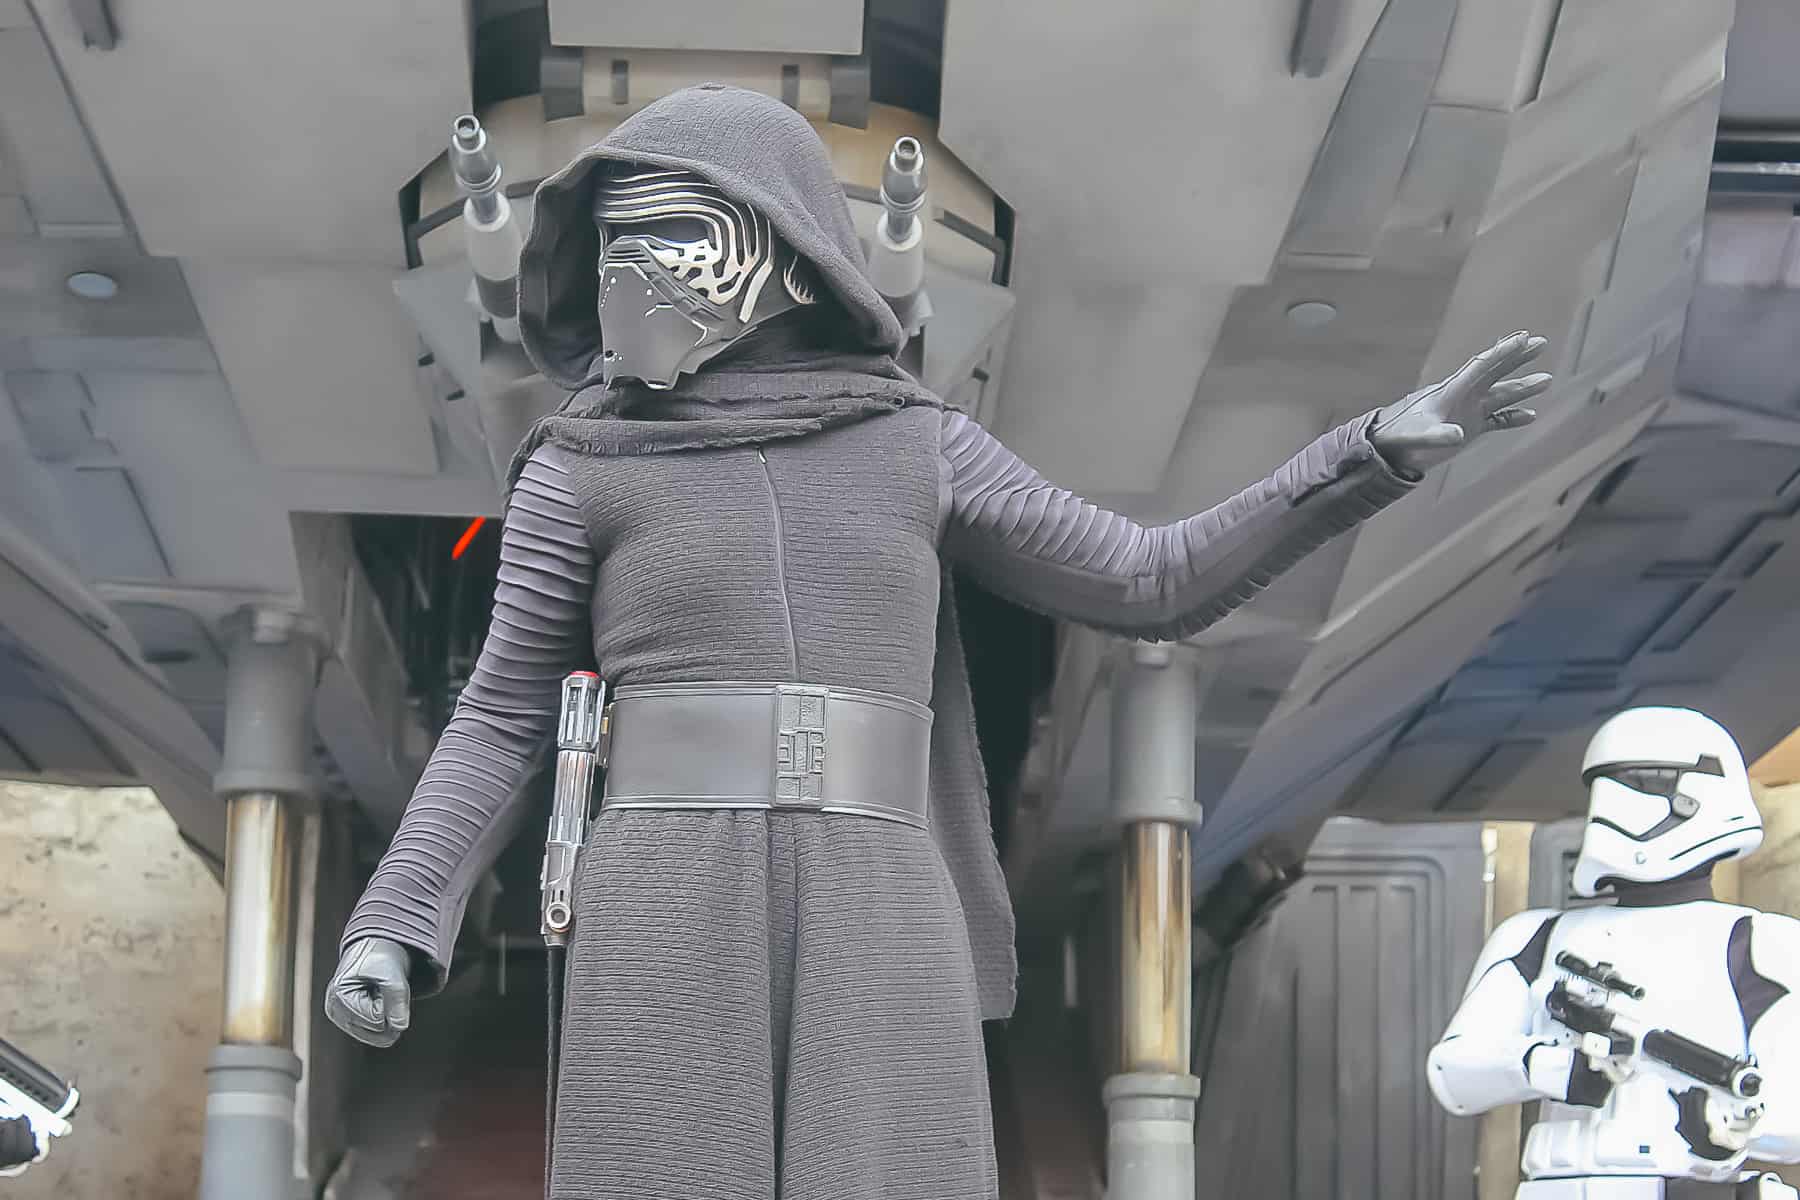 Kylo Ren uses the force in Galaxy's Edge. 